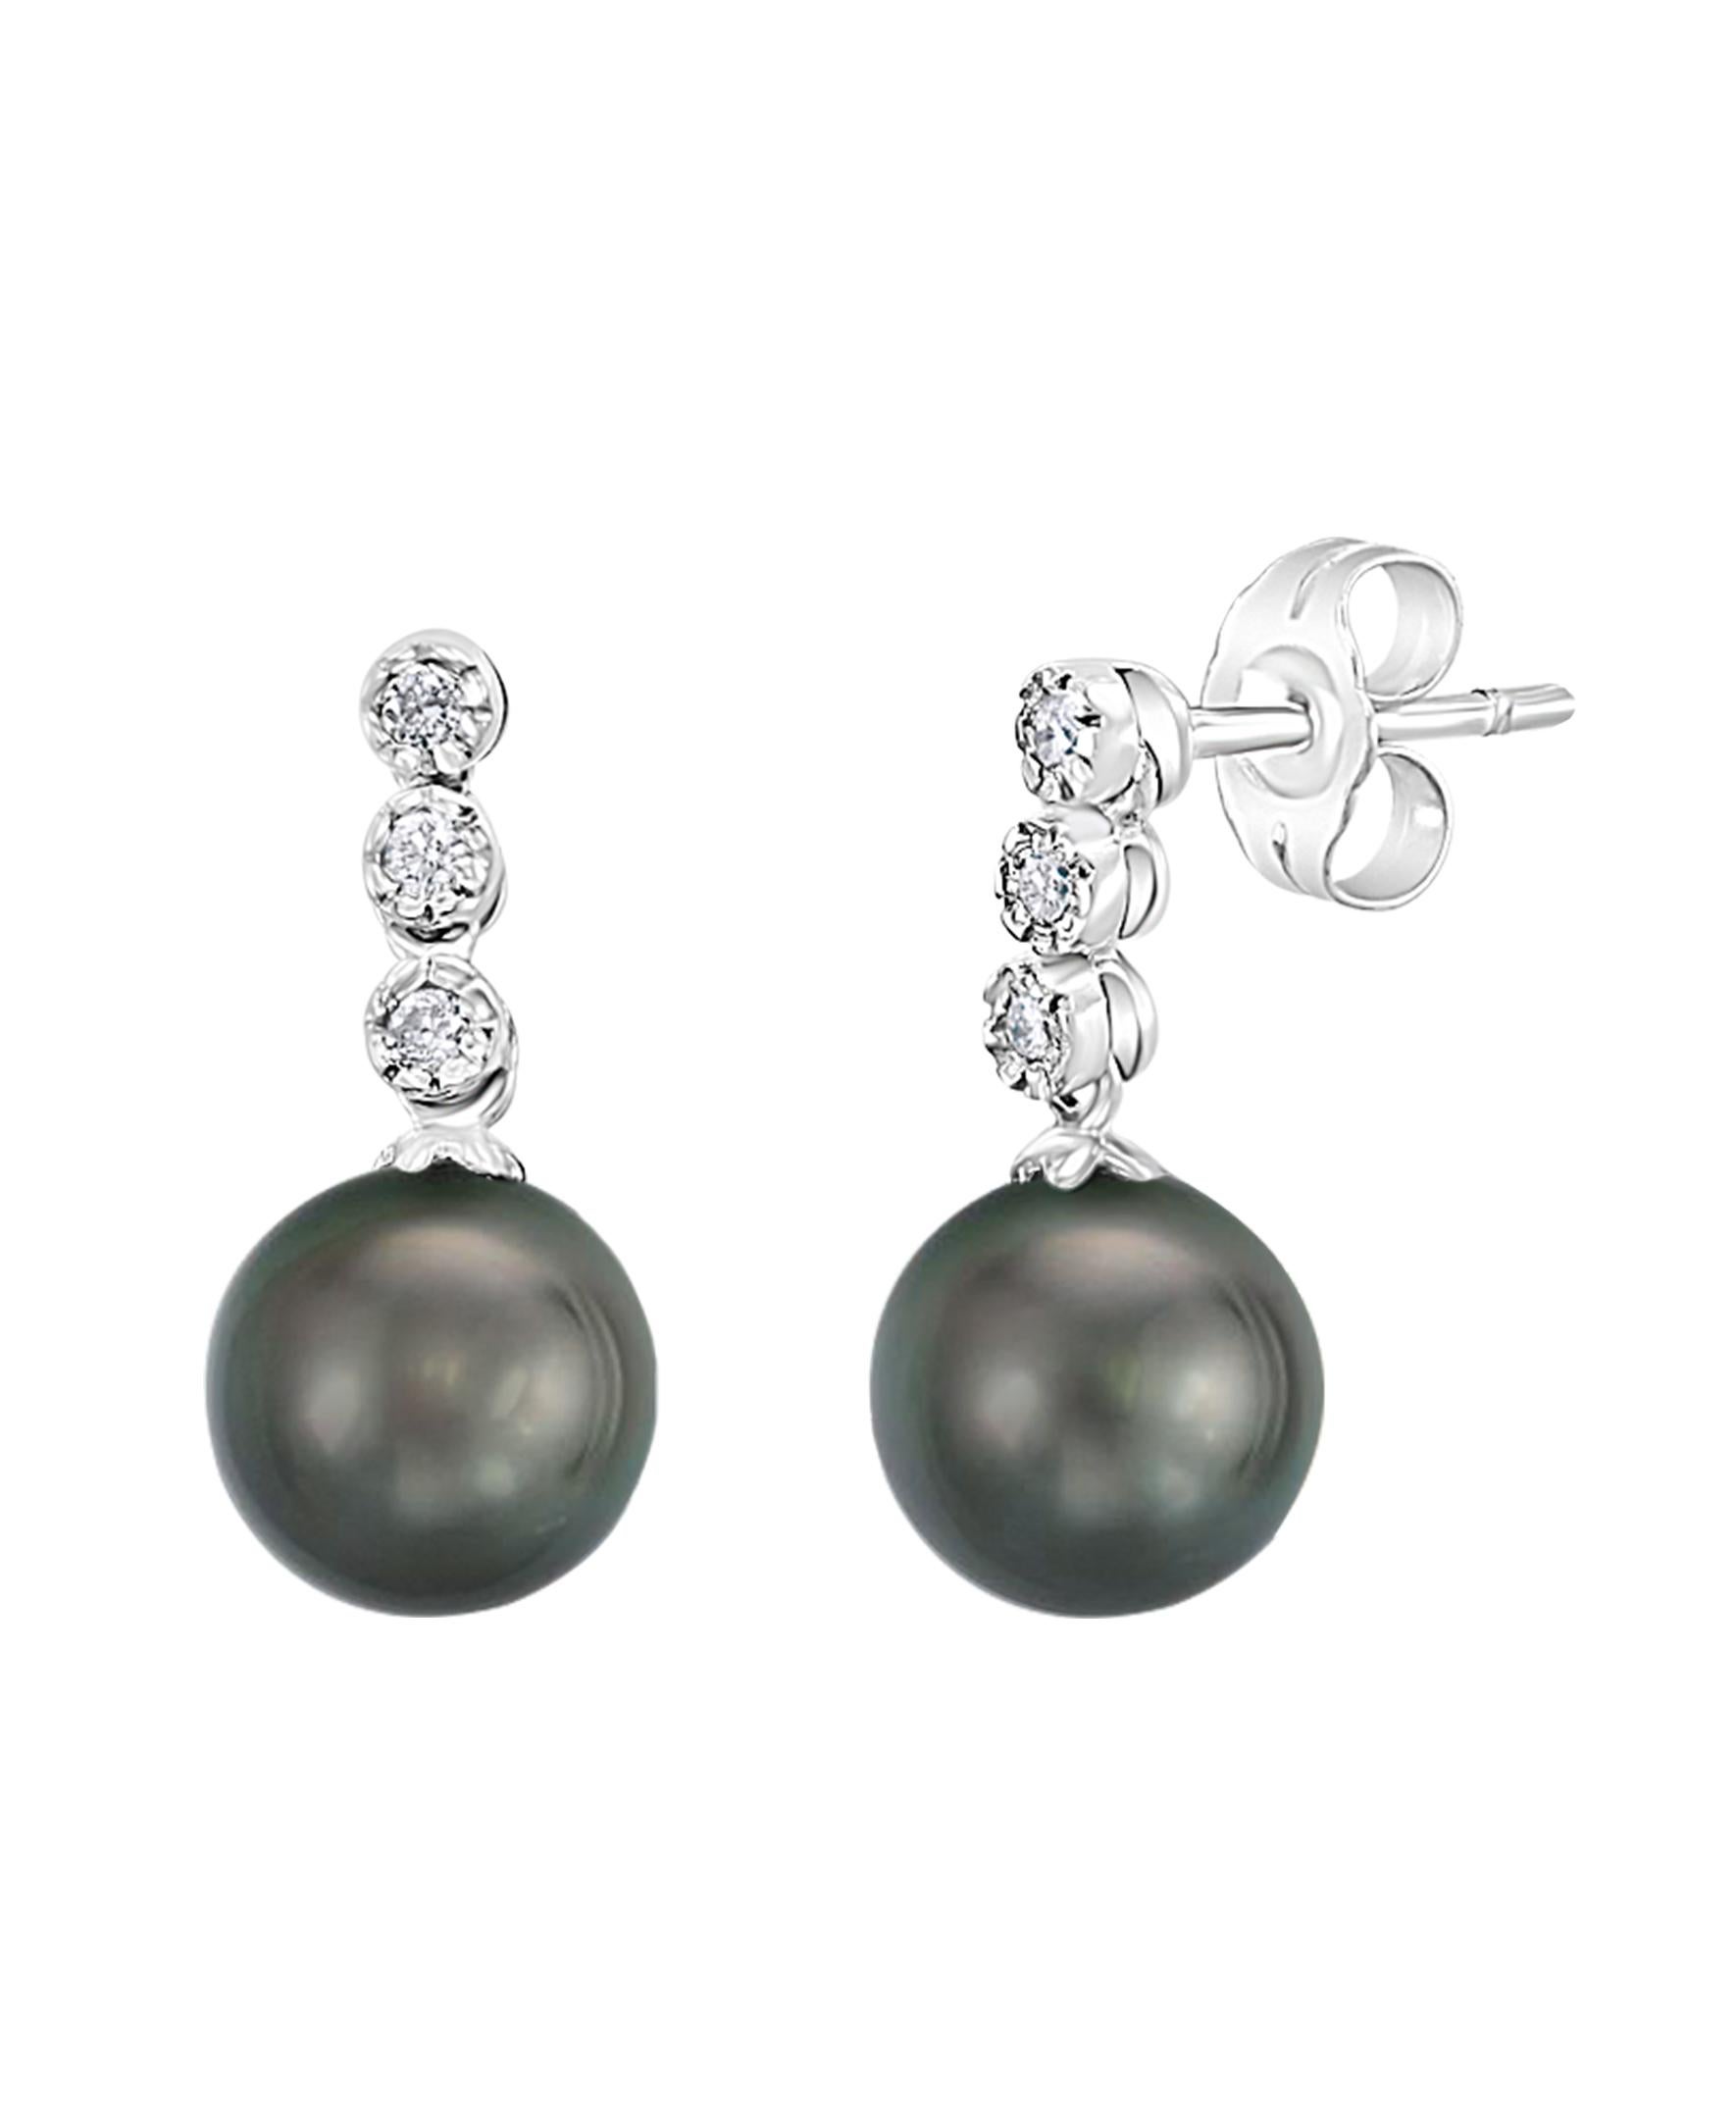 These elegant Diamond and Pearl earrings contain South Sea Tahitian dark green round cultured pearls measuring 7-8mm dangling from 0.09 carats of diamonds set in white gold. Simple, yet elegant, these earrings are a great addition to any